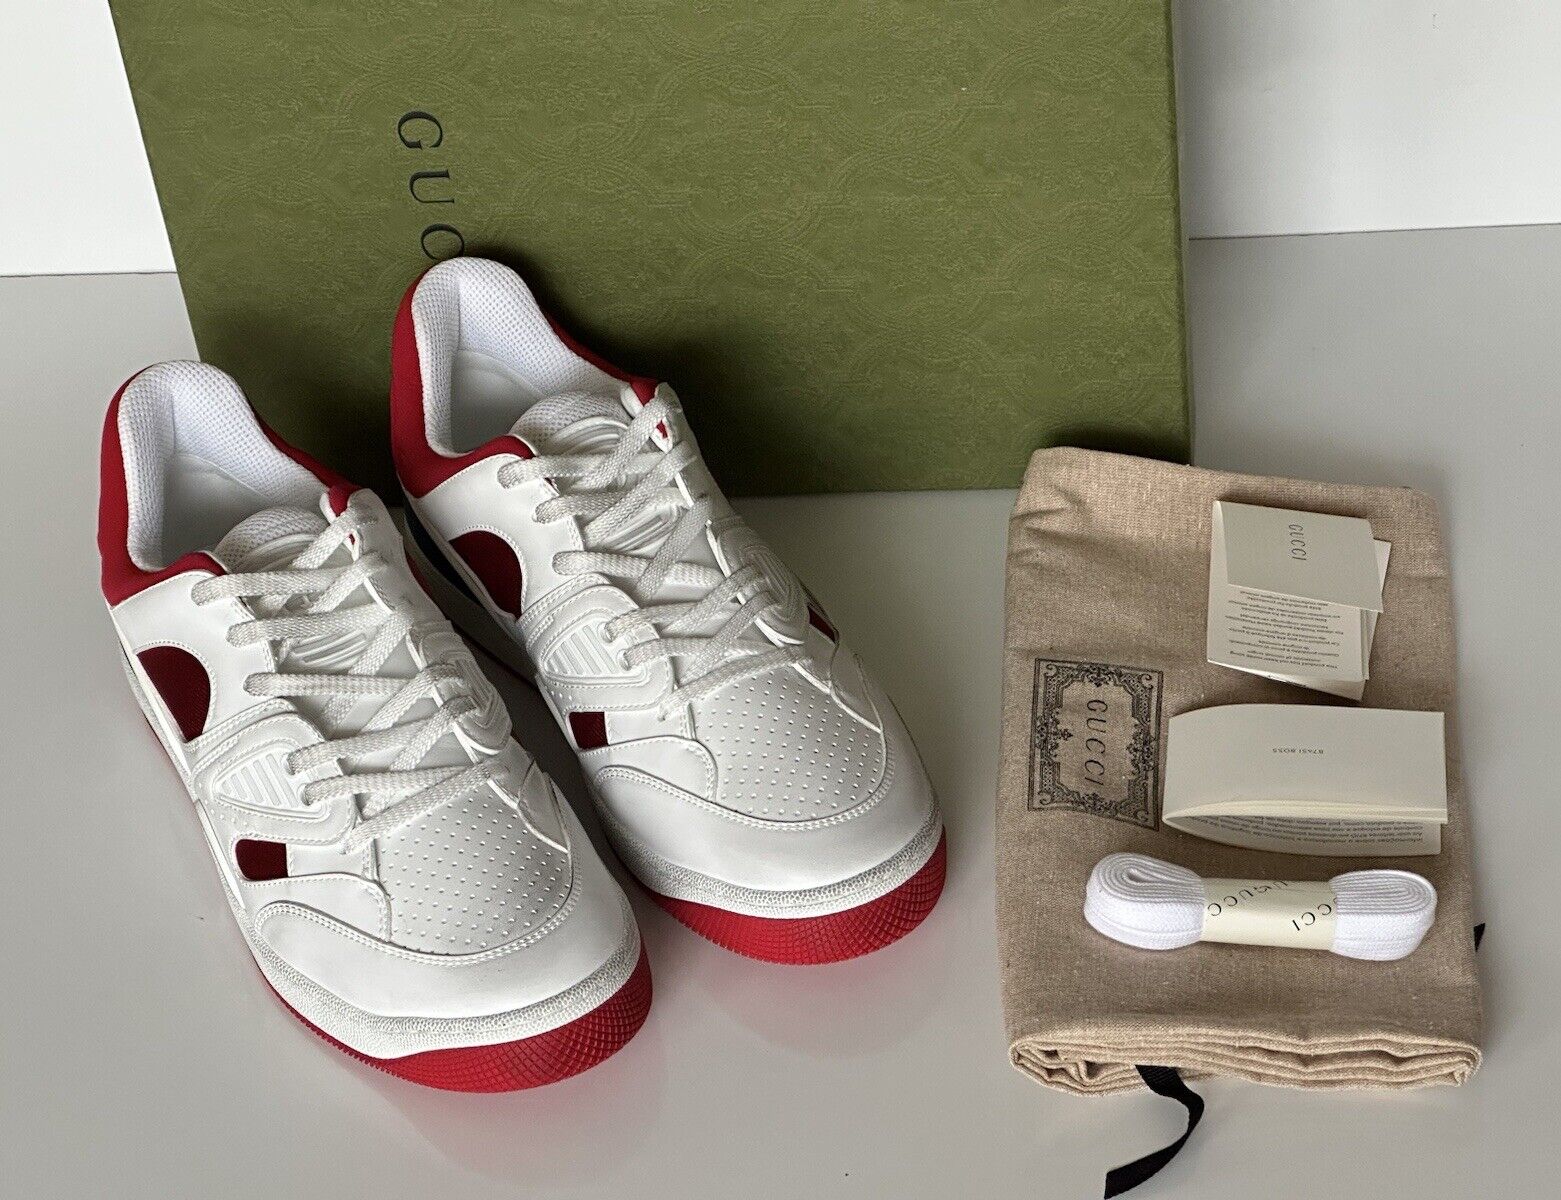 NIB Gucci Men's Low-top White/Red Leather Sneakers 9.5 US (Gucci 9G) 697882 IT